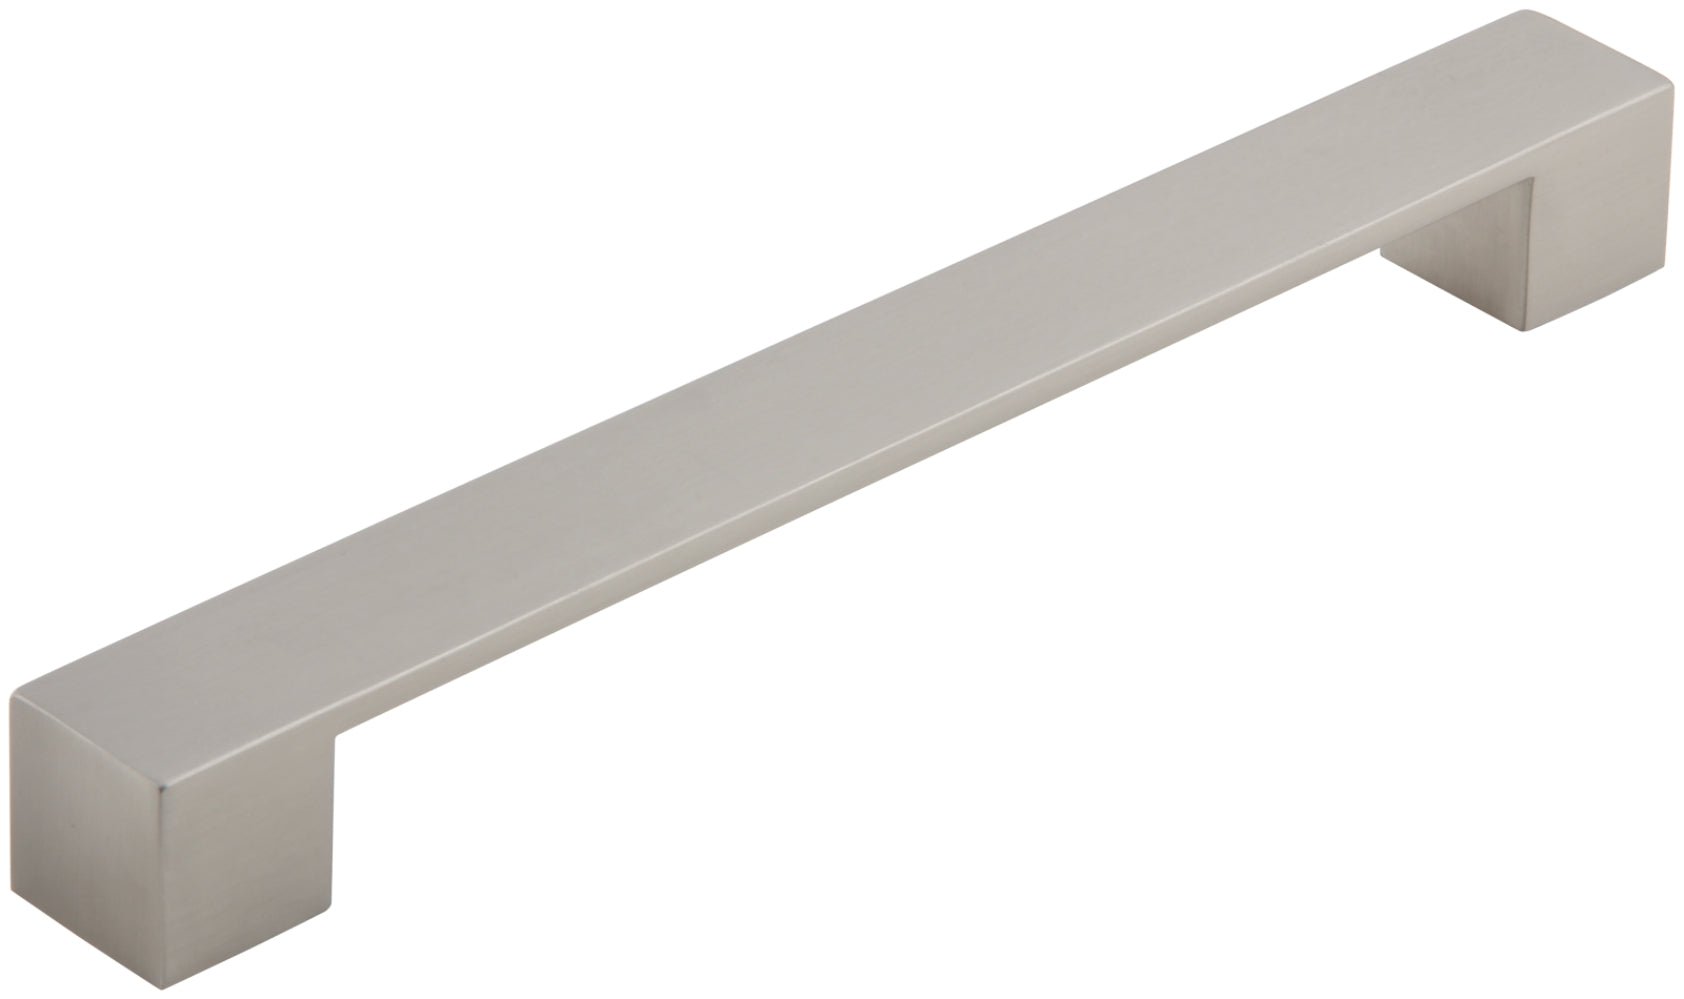 Silverline P2053 - Zinc Alloy Square Contemporary Modern Bar Pull Handle in Brushed Satin Nickel Finish Various Sizes